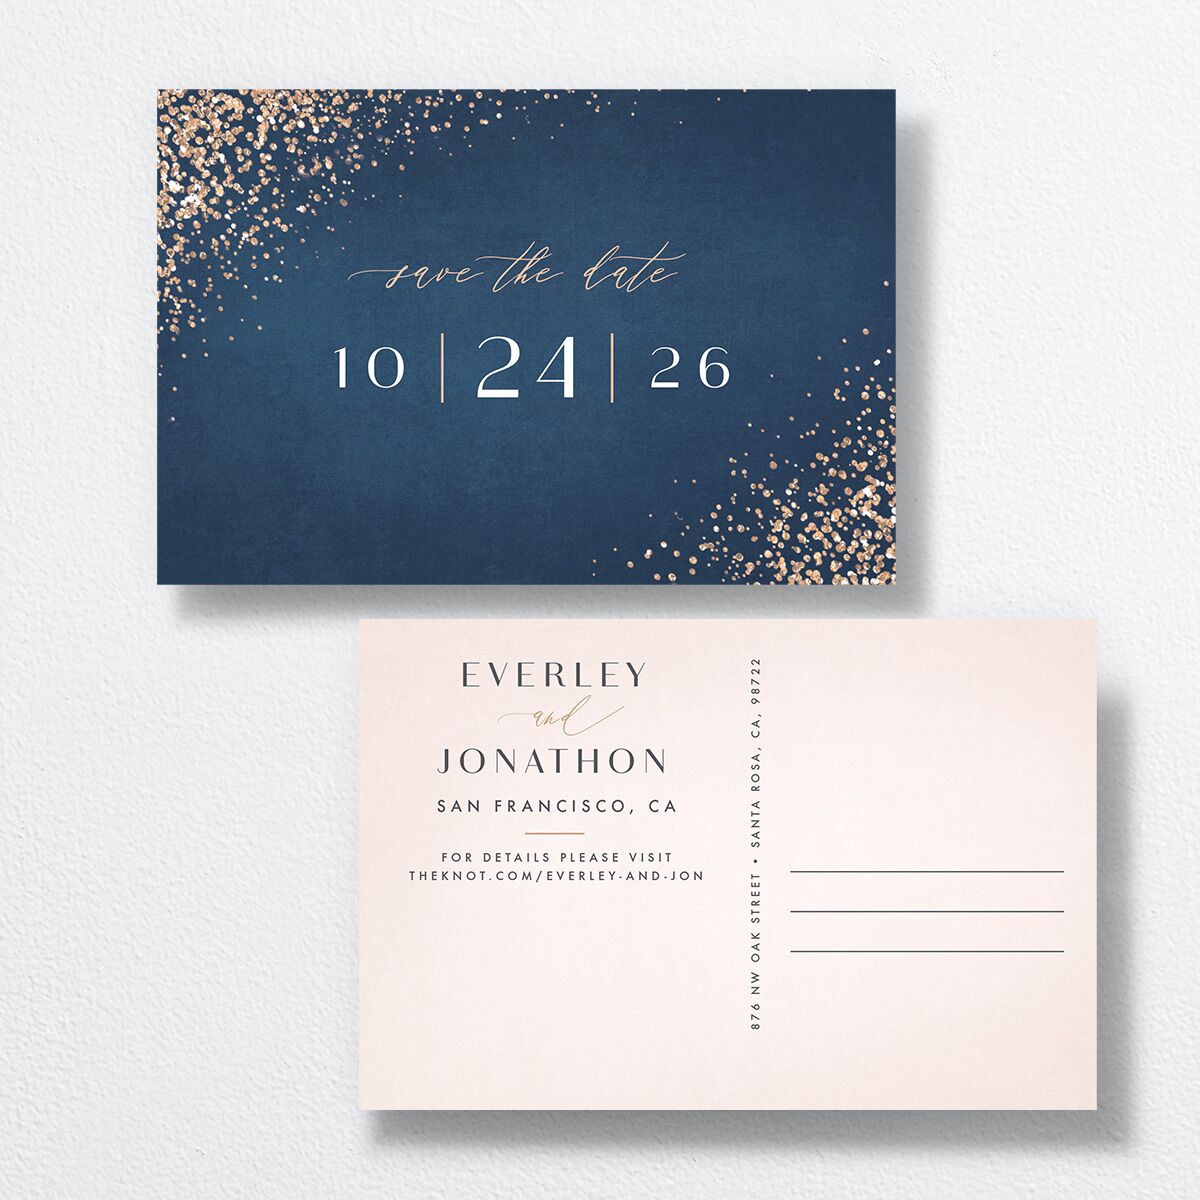 Sparkling Romance Save The Date Postcards front-and-back in blue